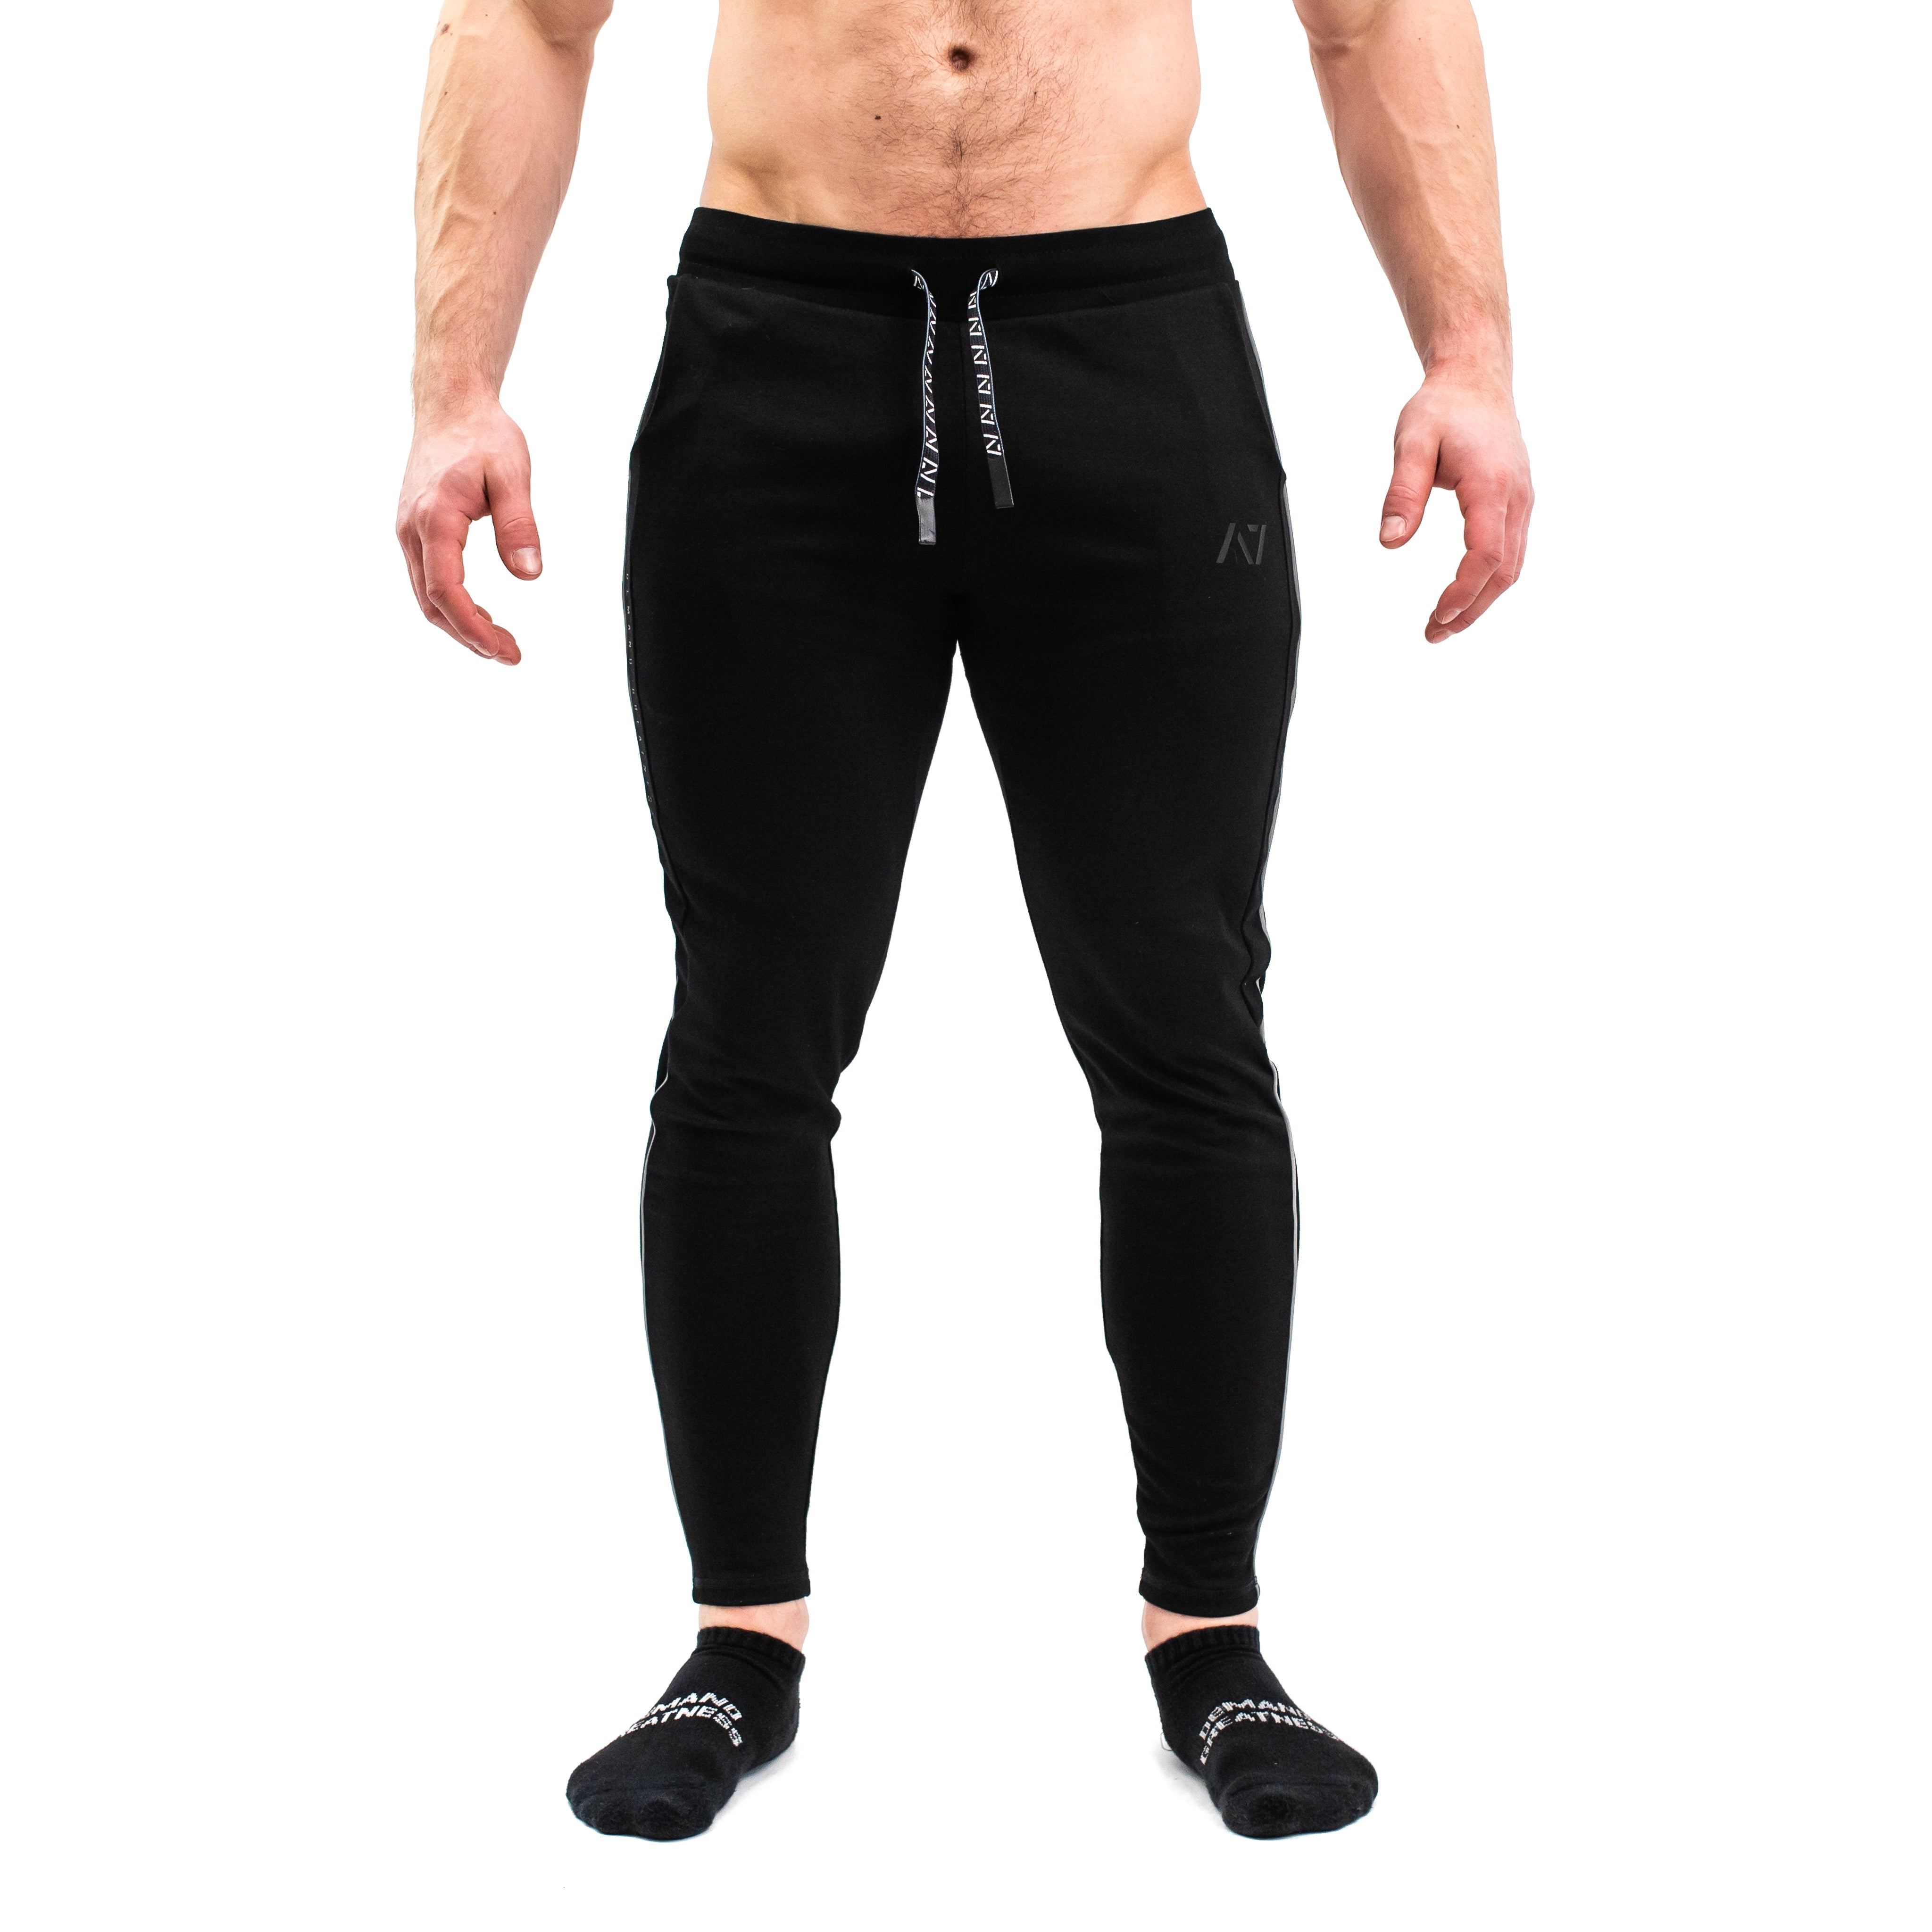 Our Moxie Joggers are made with premium cotton spandex fabric to keep you comfy throughout the day whether you are training or going out! Our Moxie Joggers contour to your body and feature a reflective stripe on both side, deep un-zippered pockets and stealth matte logos.